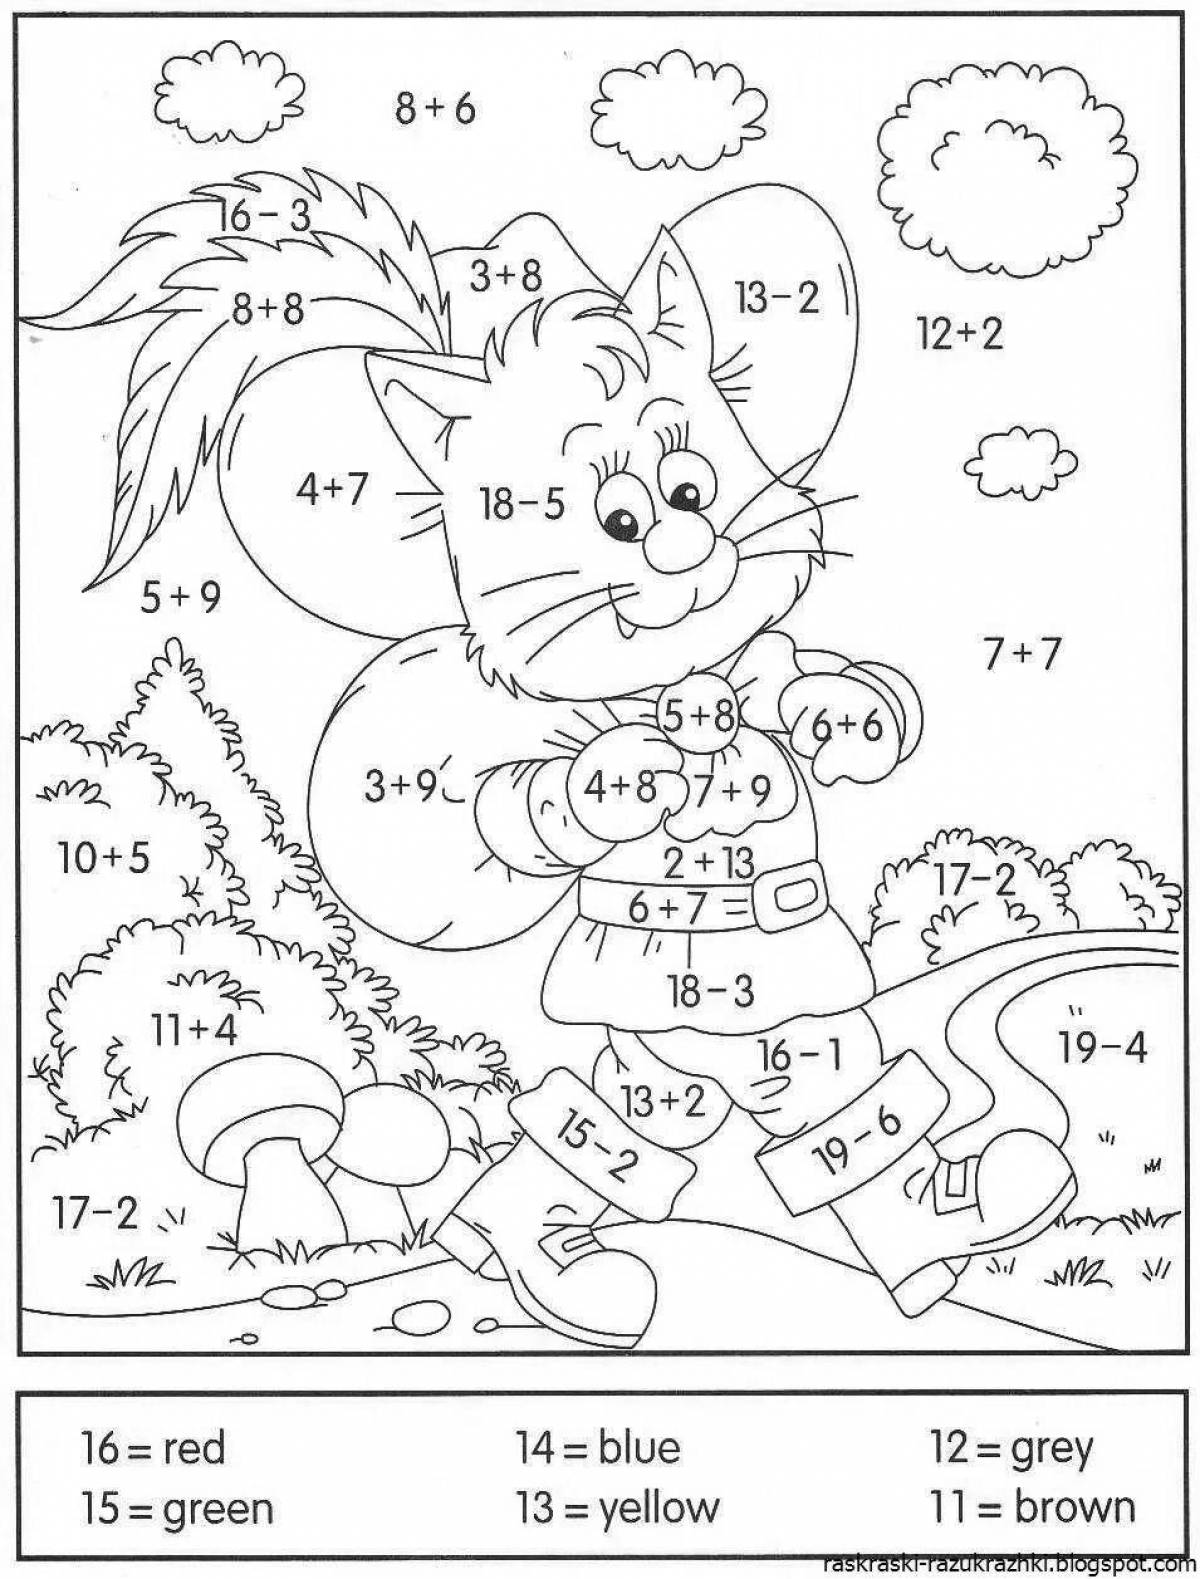 Fun counting within 20 coloring pages